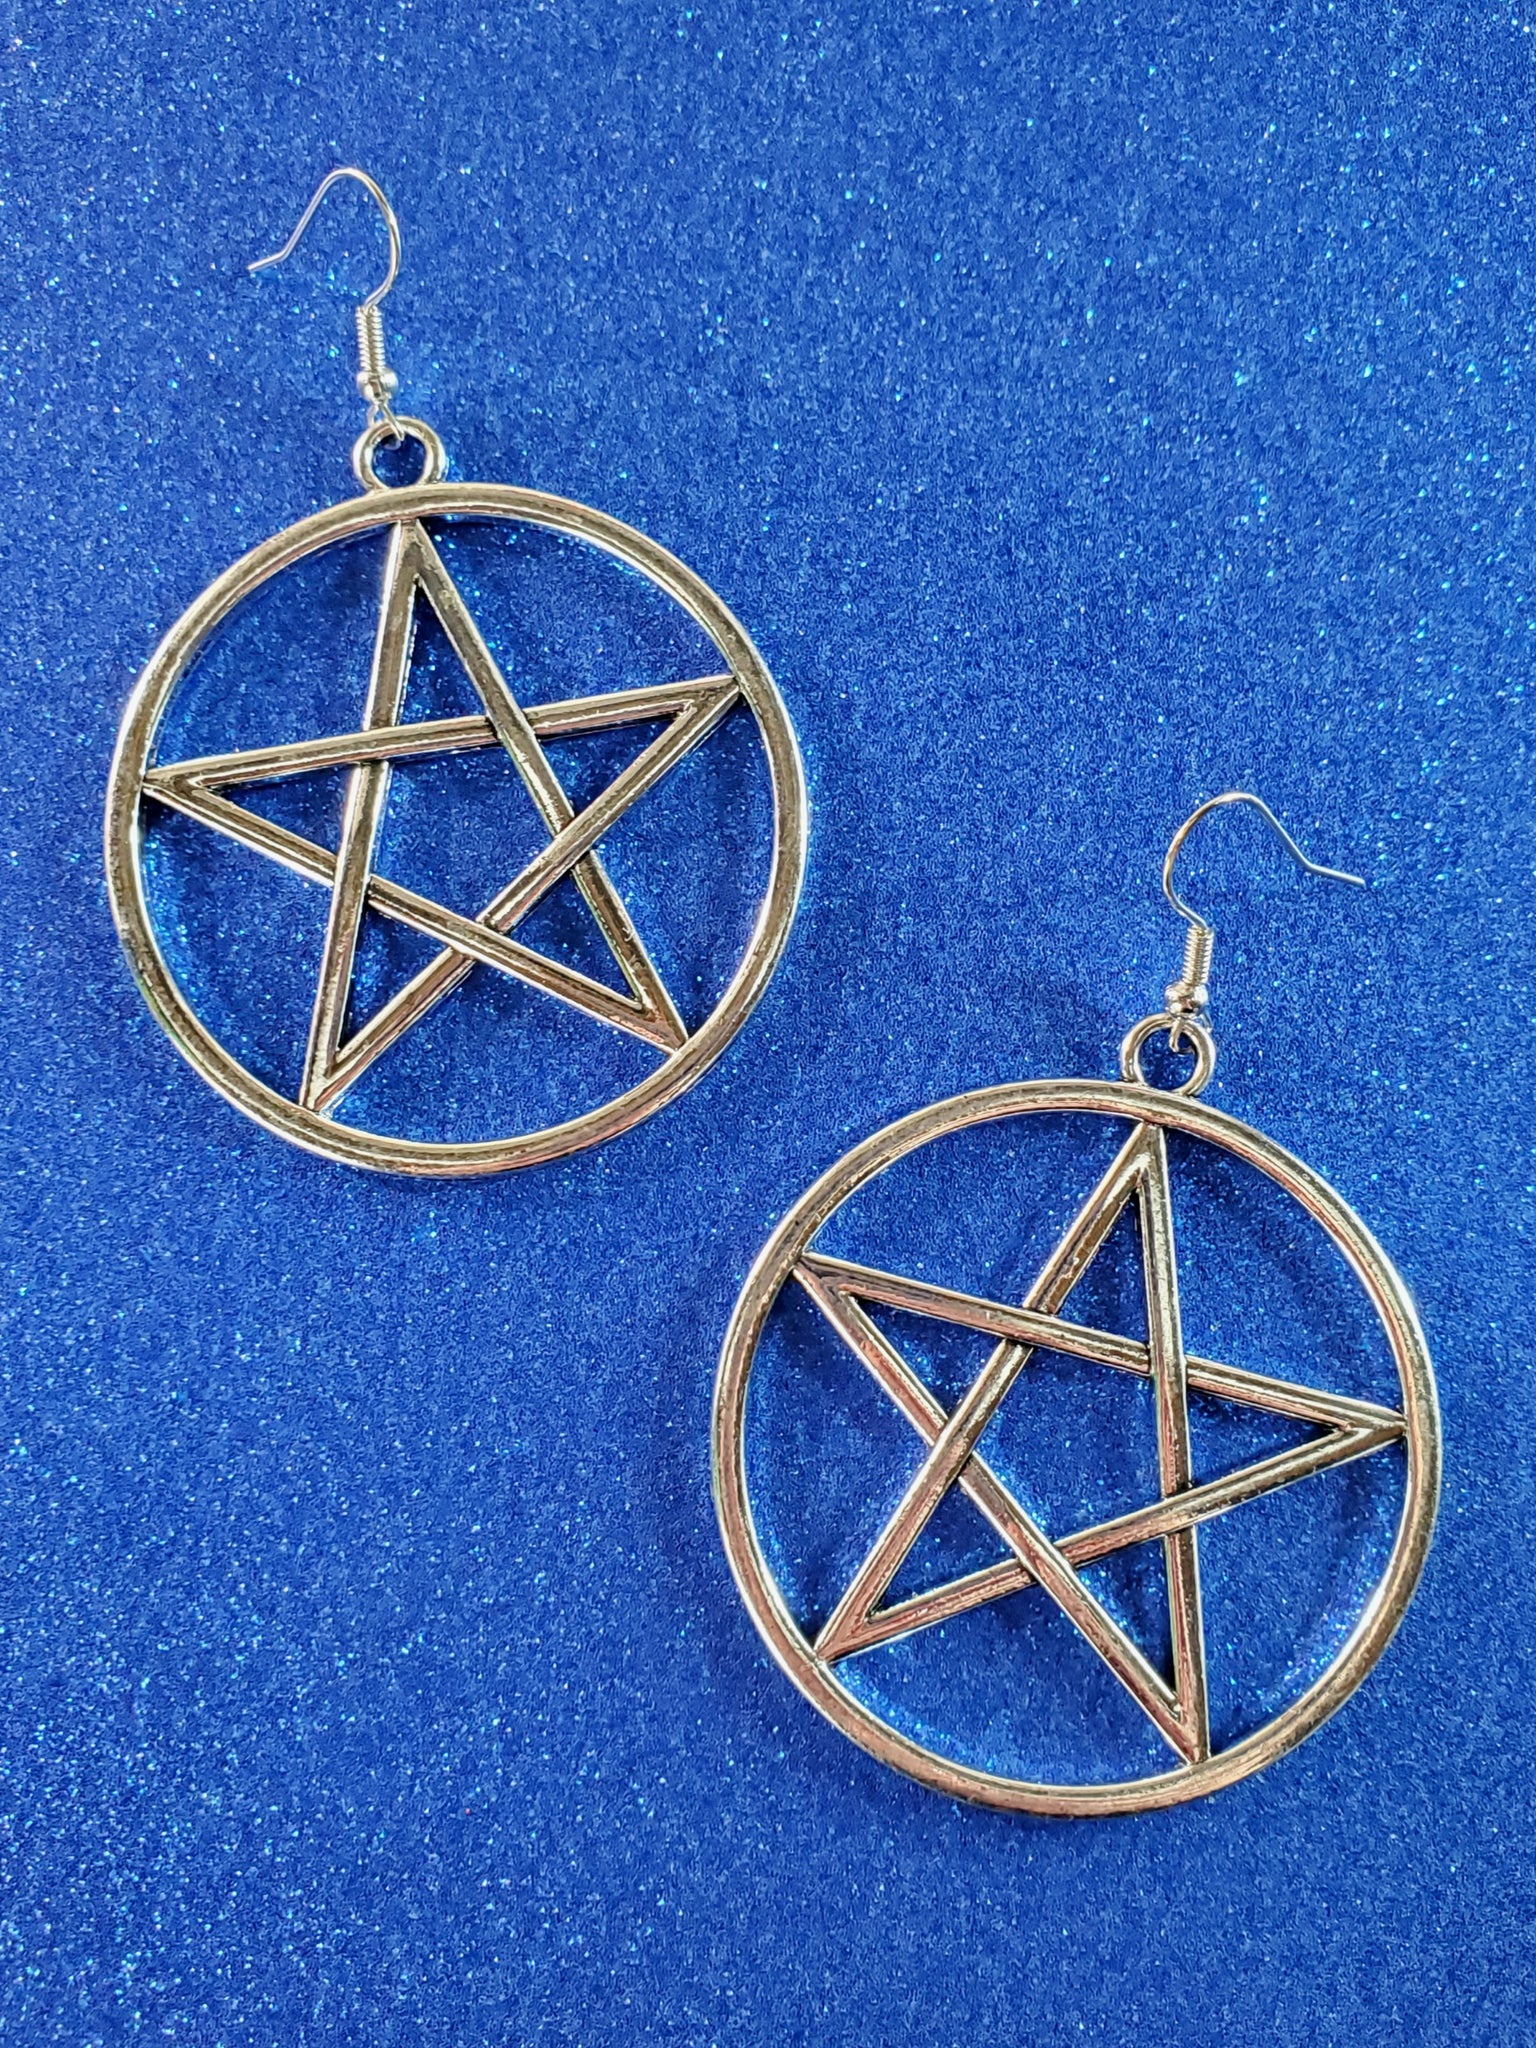 A pair of bold shiny silver metal 2" pentacle dangle earrings with matching metal fishhook style ear wires